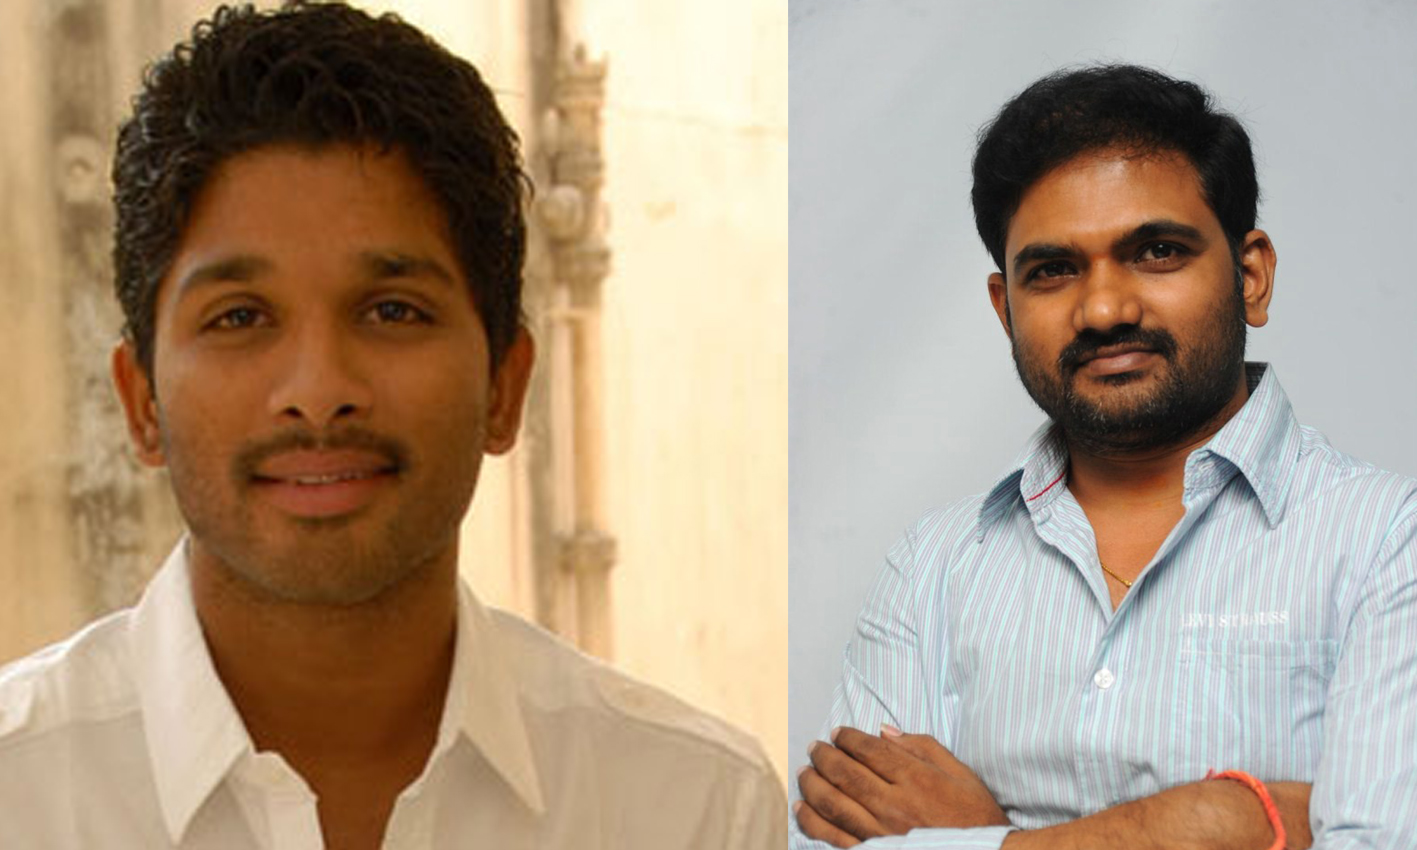 Maruthi with allu arjun, Maruthi new movie with allu arjun, Maruthi and allu arjun, maruthi with Allu arjun in new movie